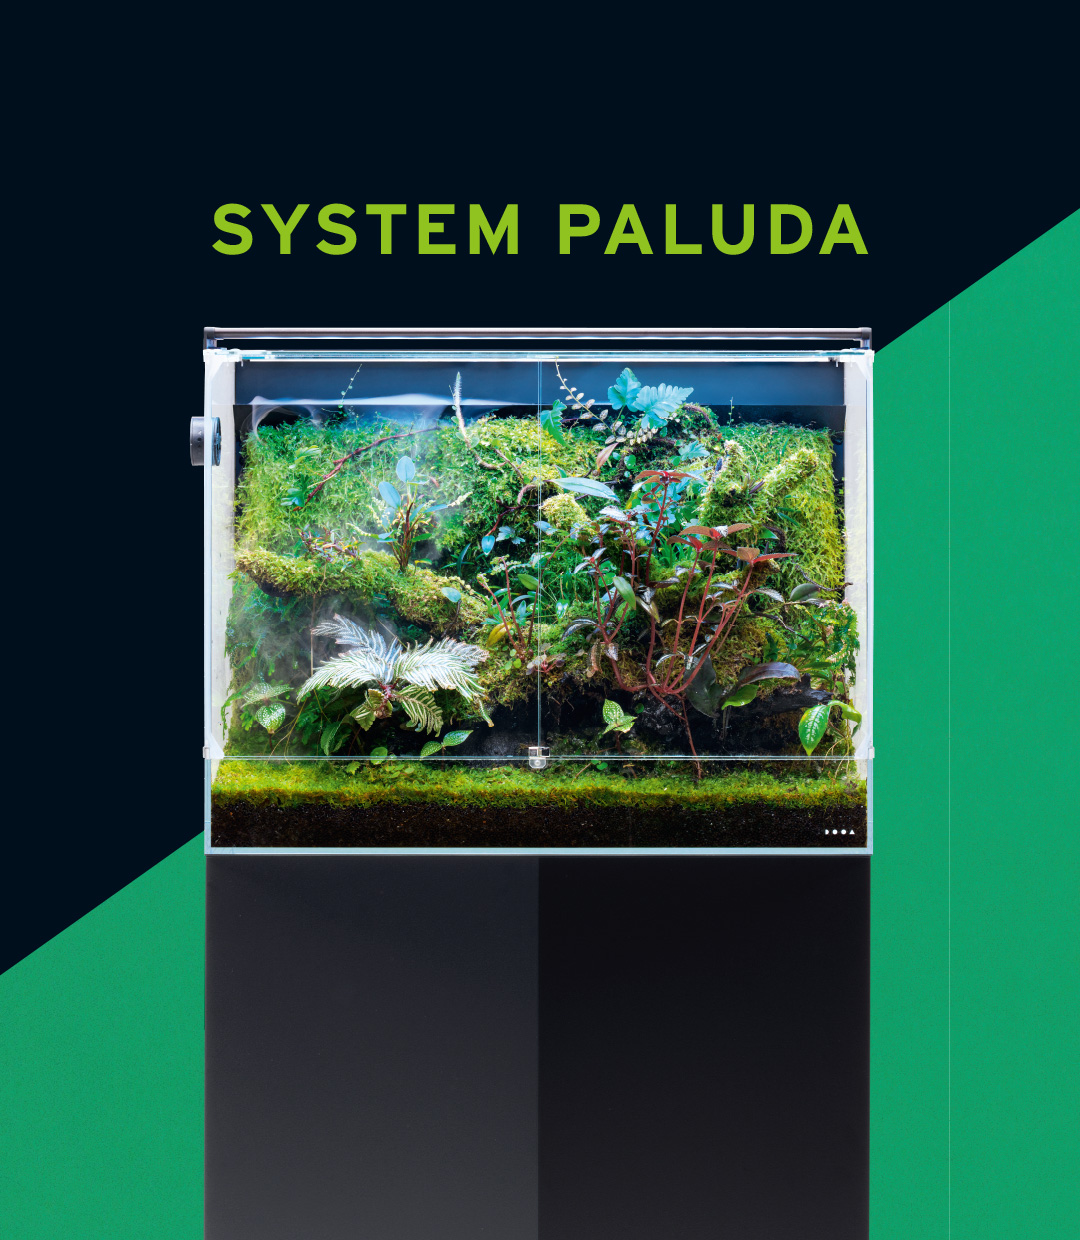 DOOA SYSTEM PALUDA 60 ‘Reproduce the Environment of Tropical Cloud Forests with Blue Tinted Light and Mist’